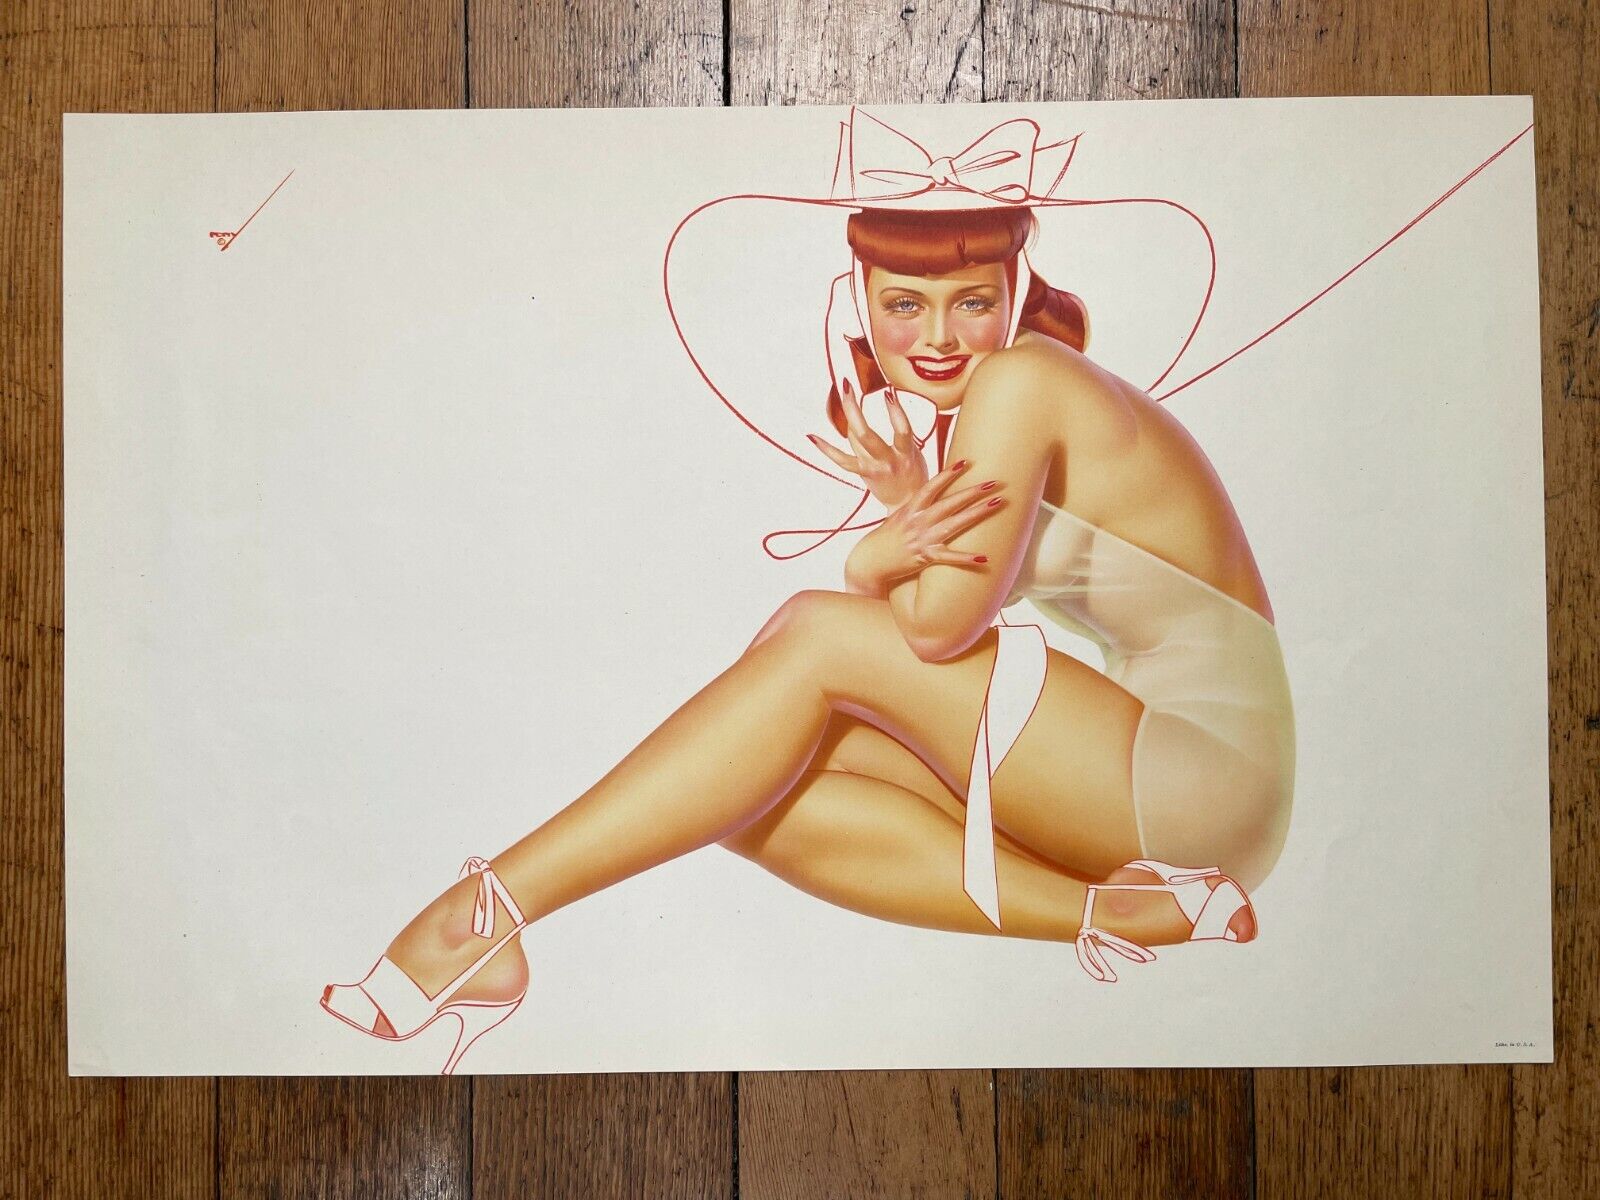 1950s Pinup Girl Poster The Petty Girl --Red Head on Phone